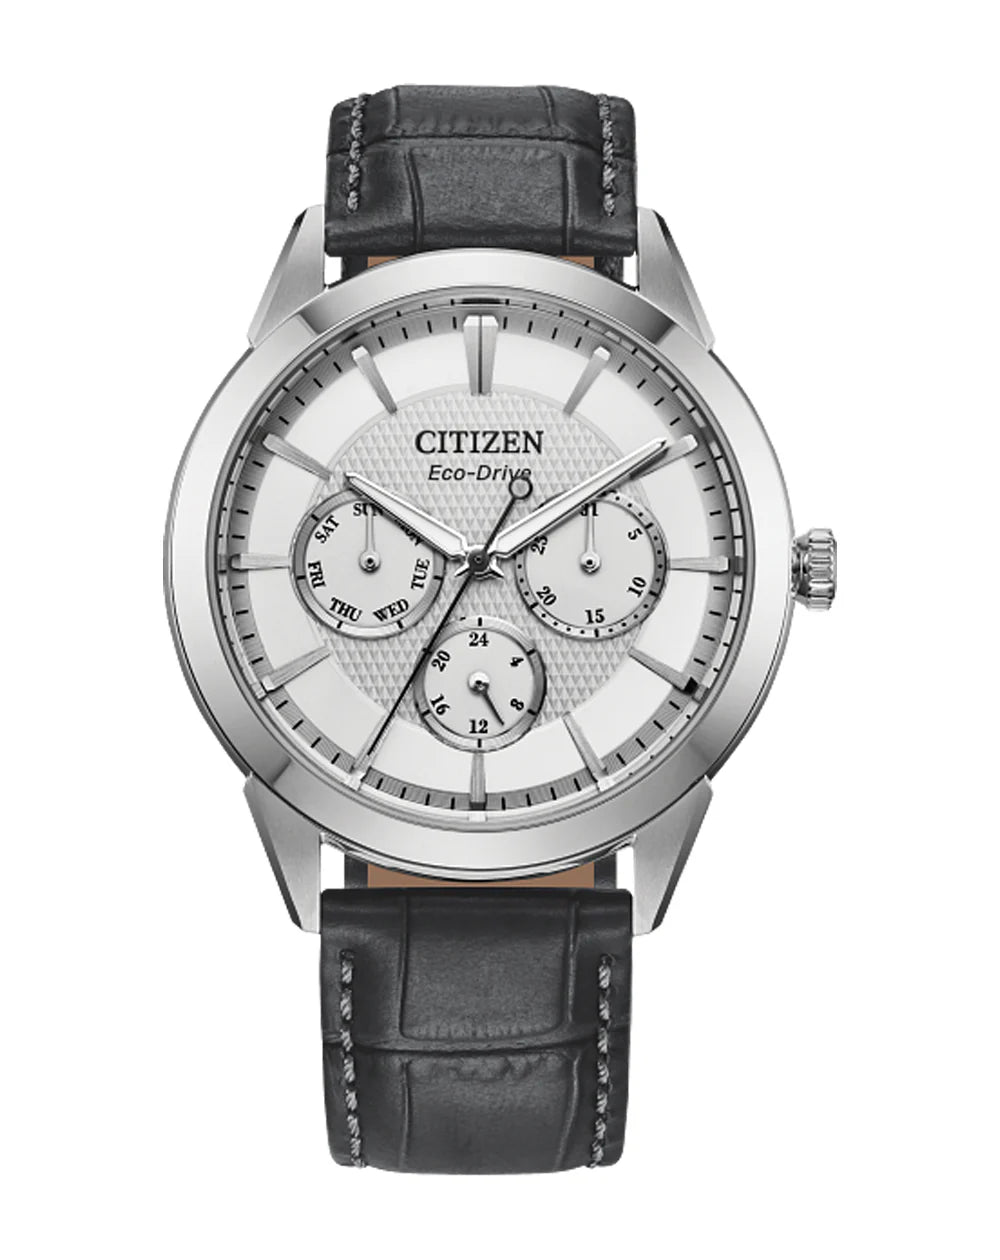 Citizen Eco-Drive Chronograph with Leather Strap